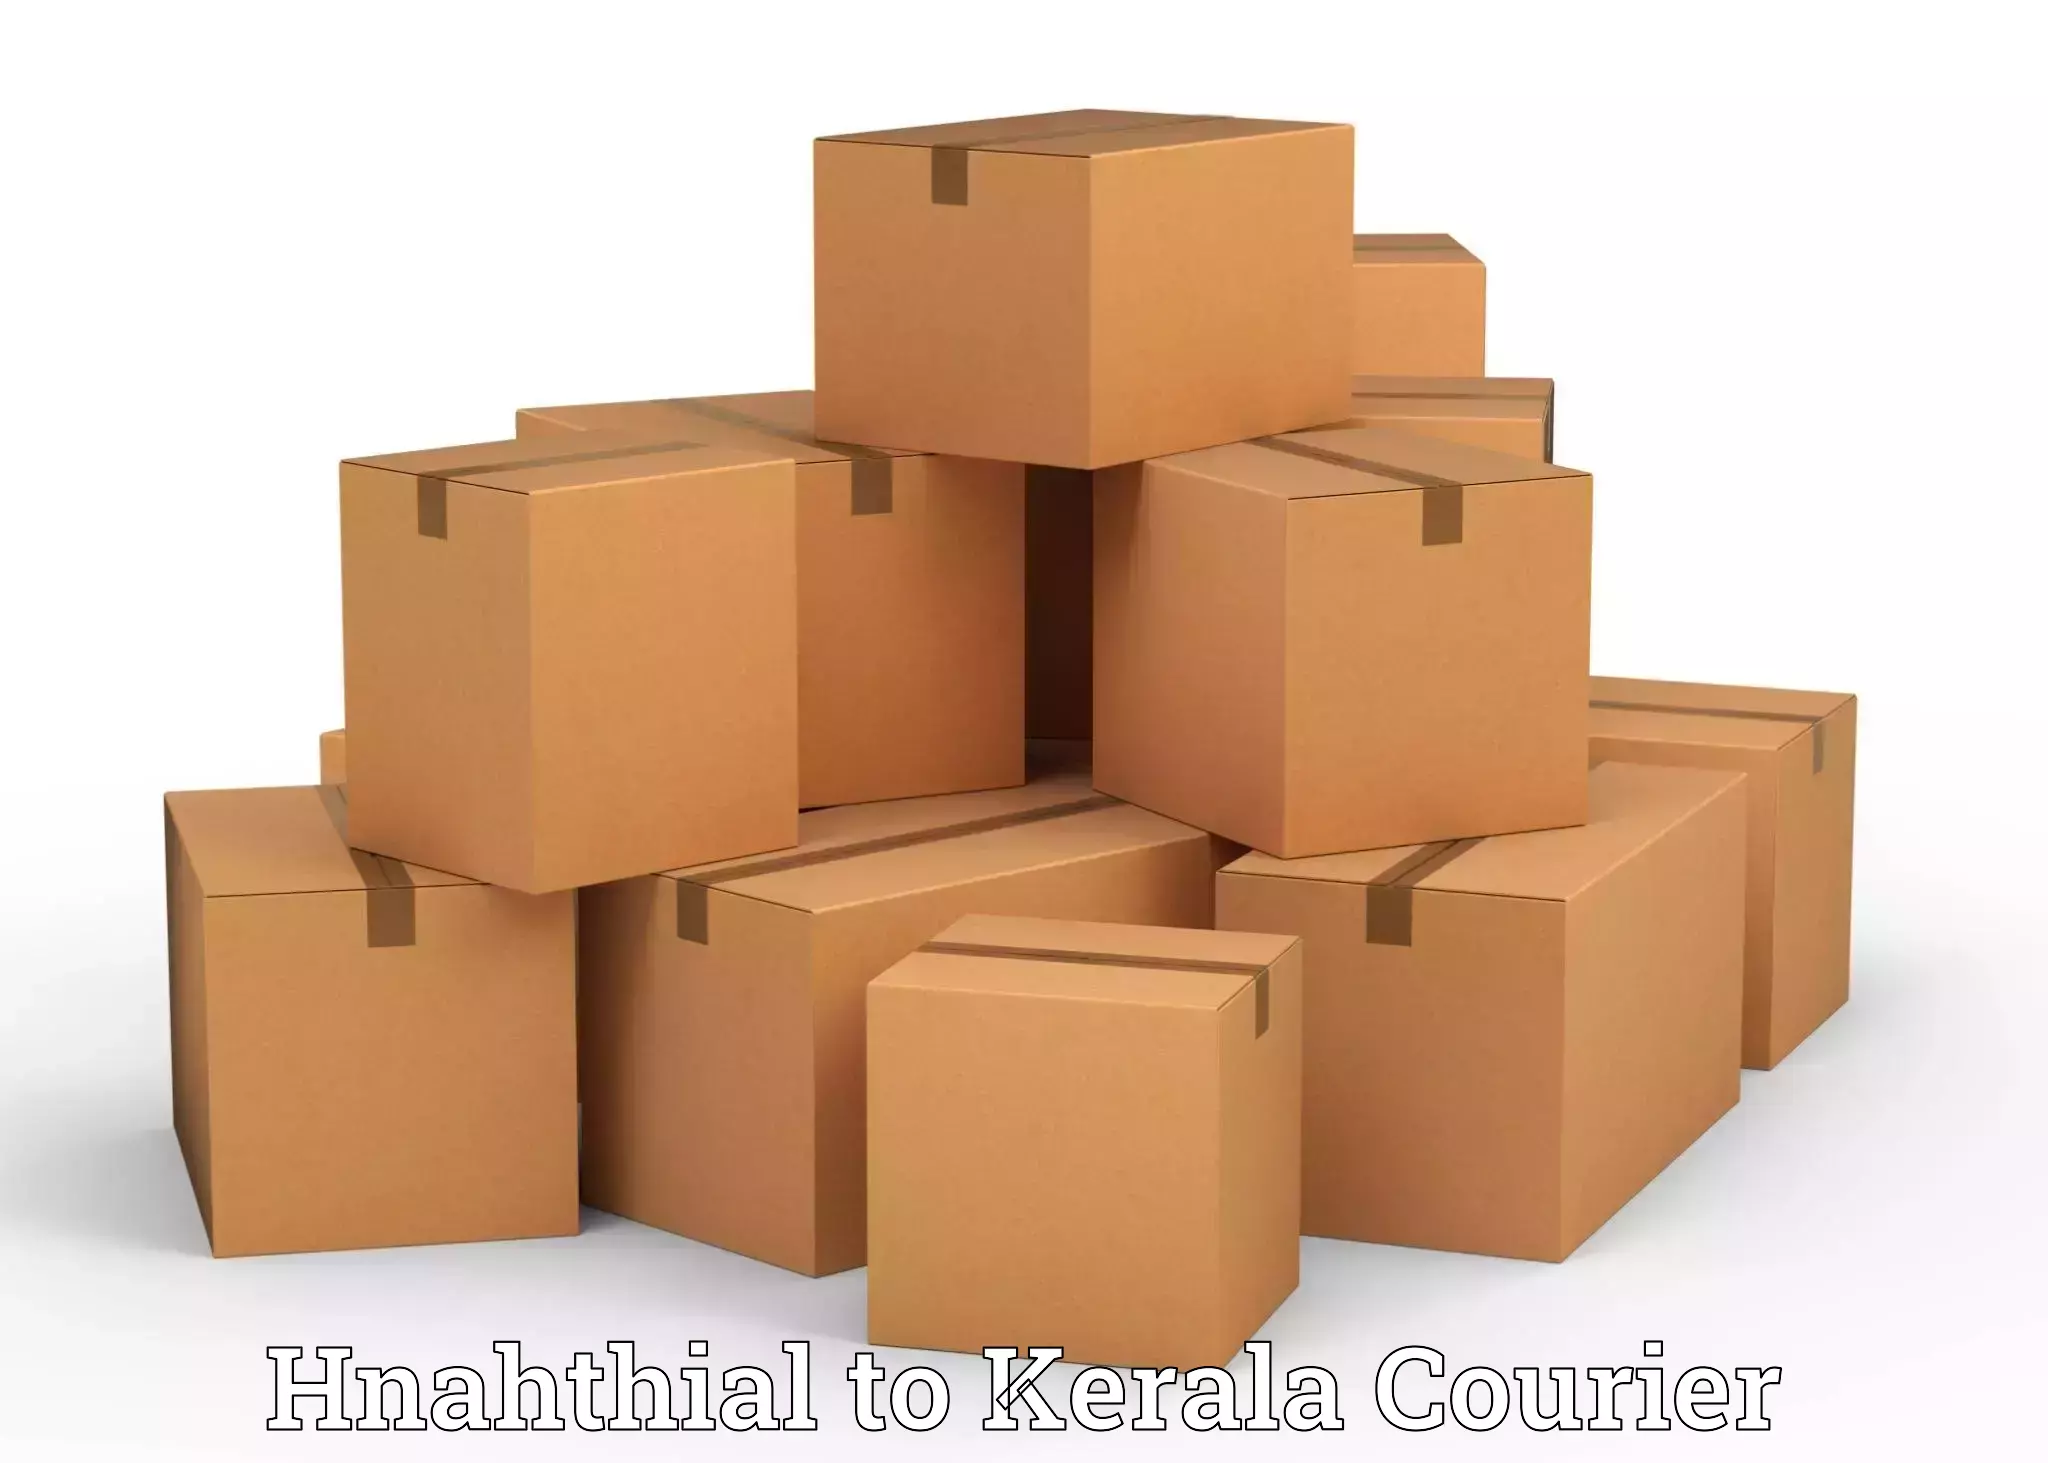 Professional movers Hnahthial to Trivandrum